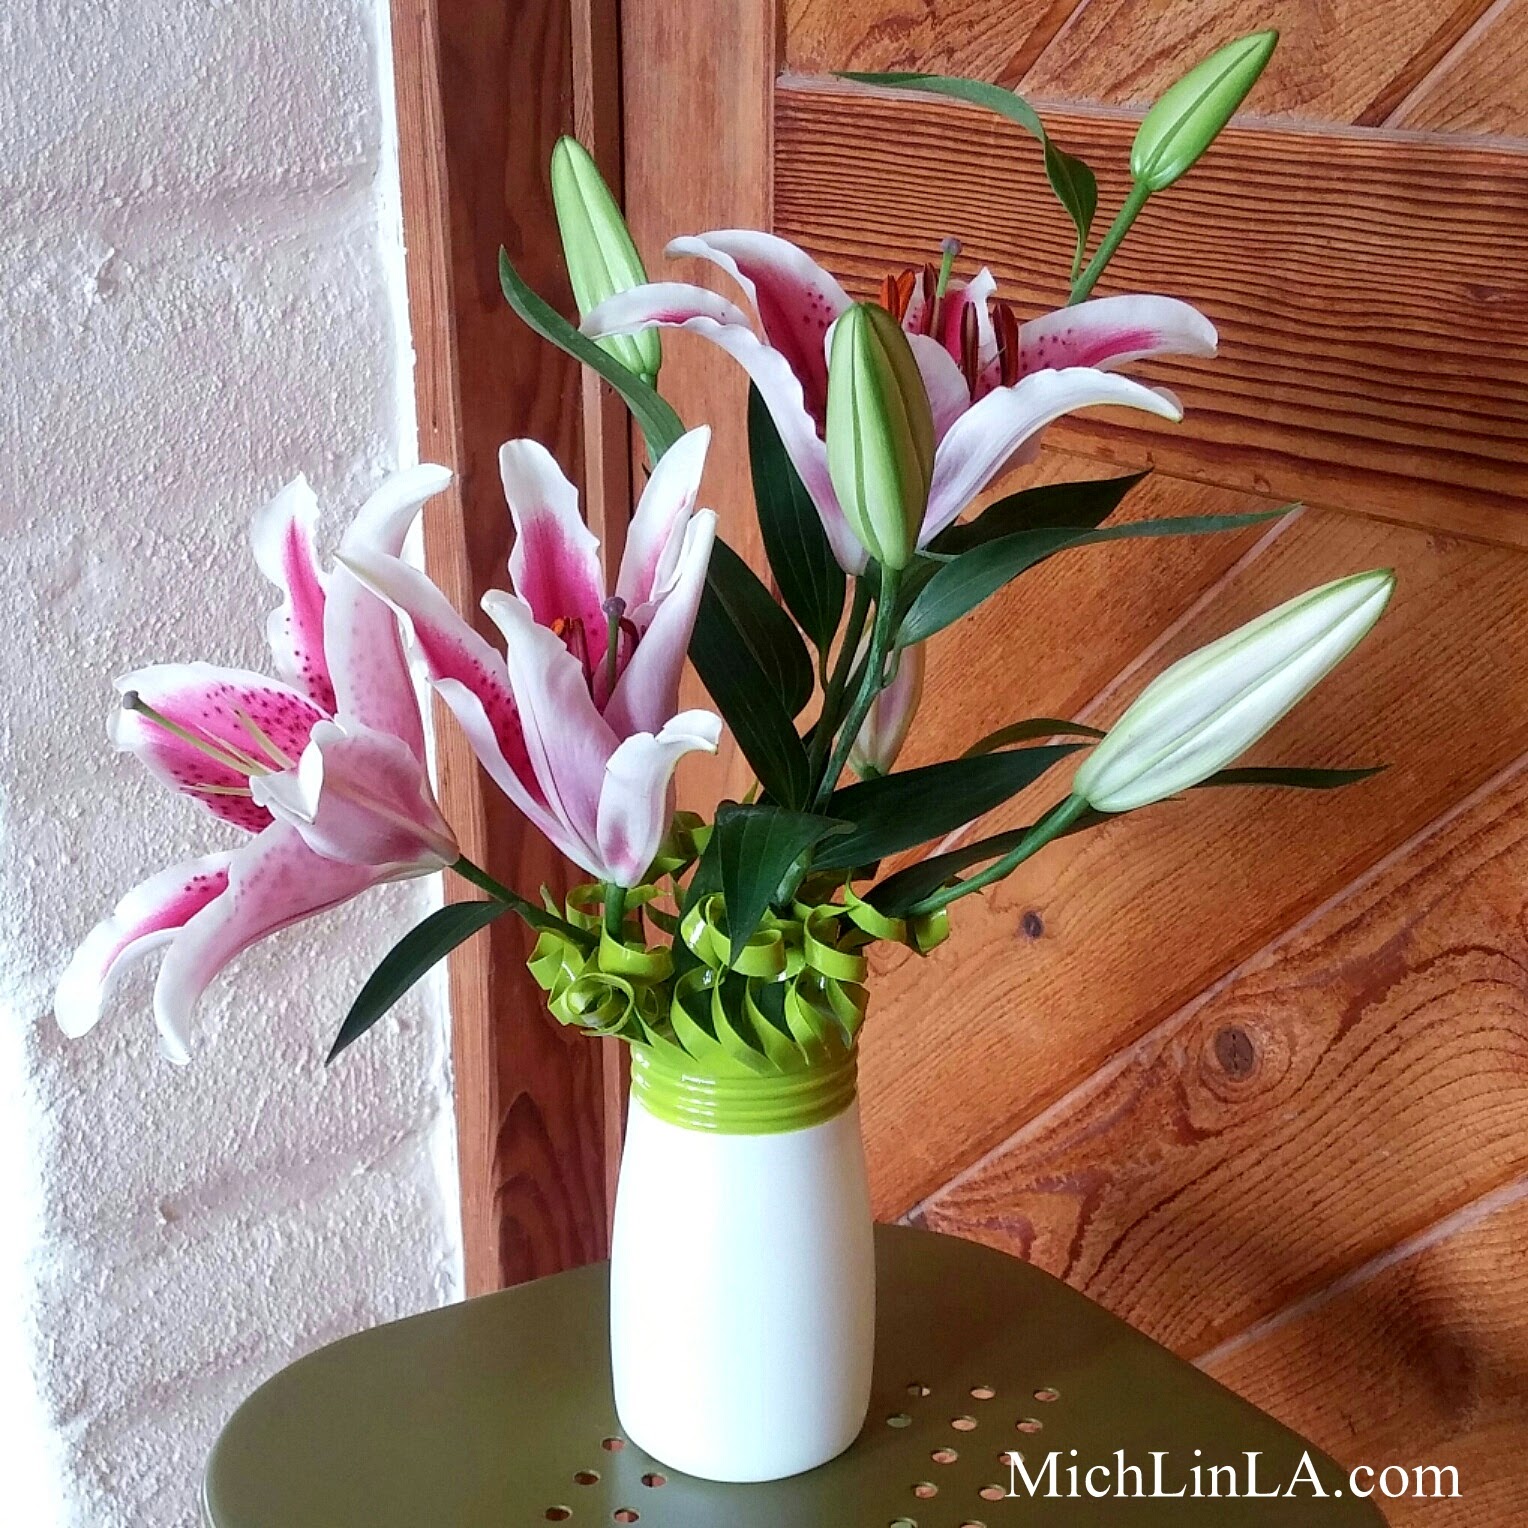 Mich L. in L.A.: Tender Tendrils Upcycled Vase Tutorial